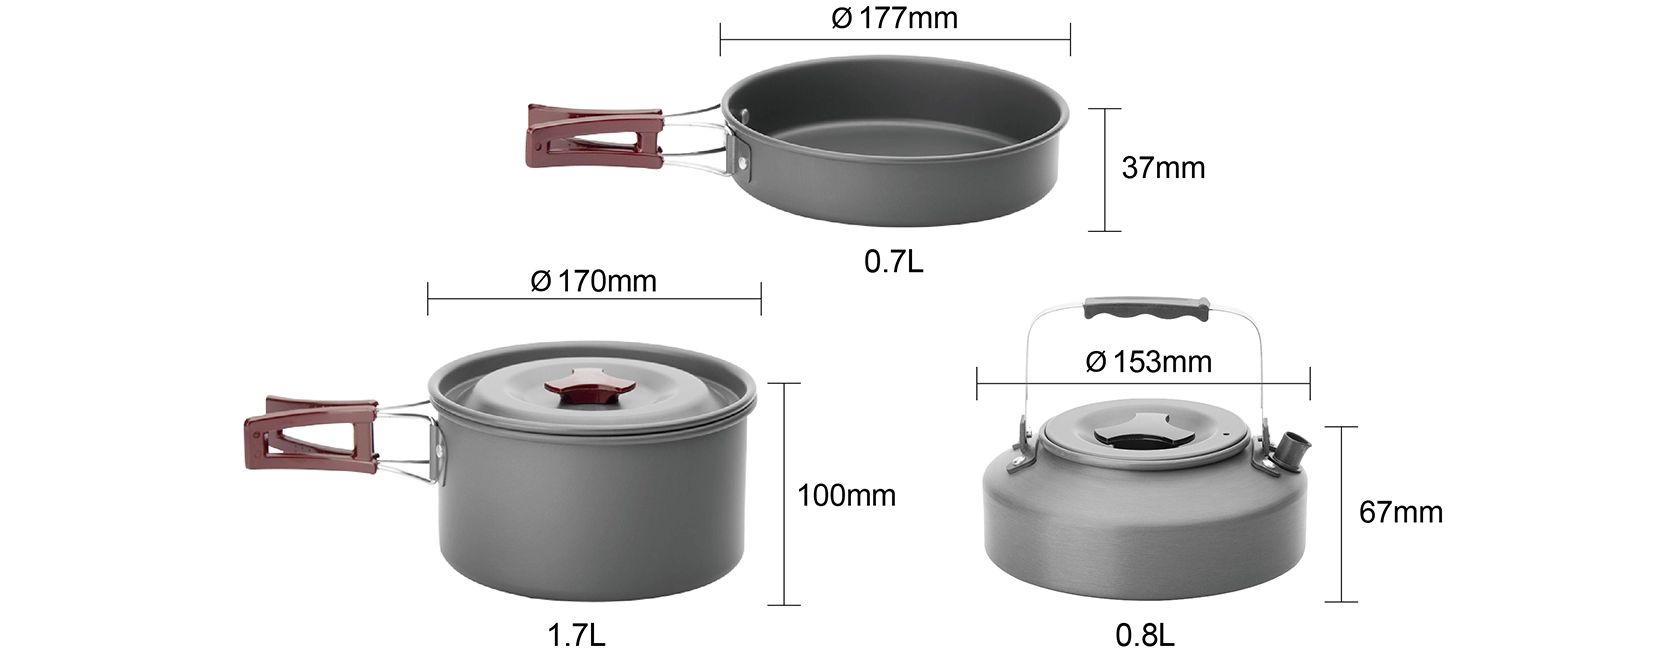 details of Hard Anodised Aluminum Camping Cookware with Tea Kettle